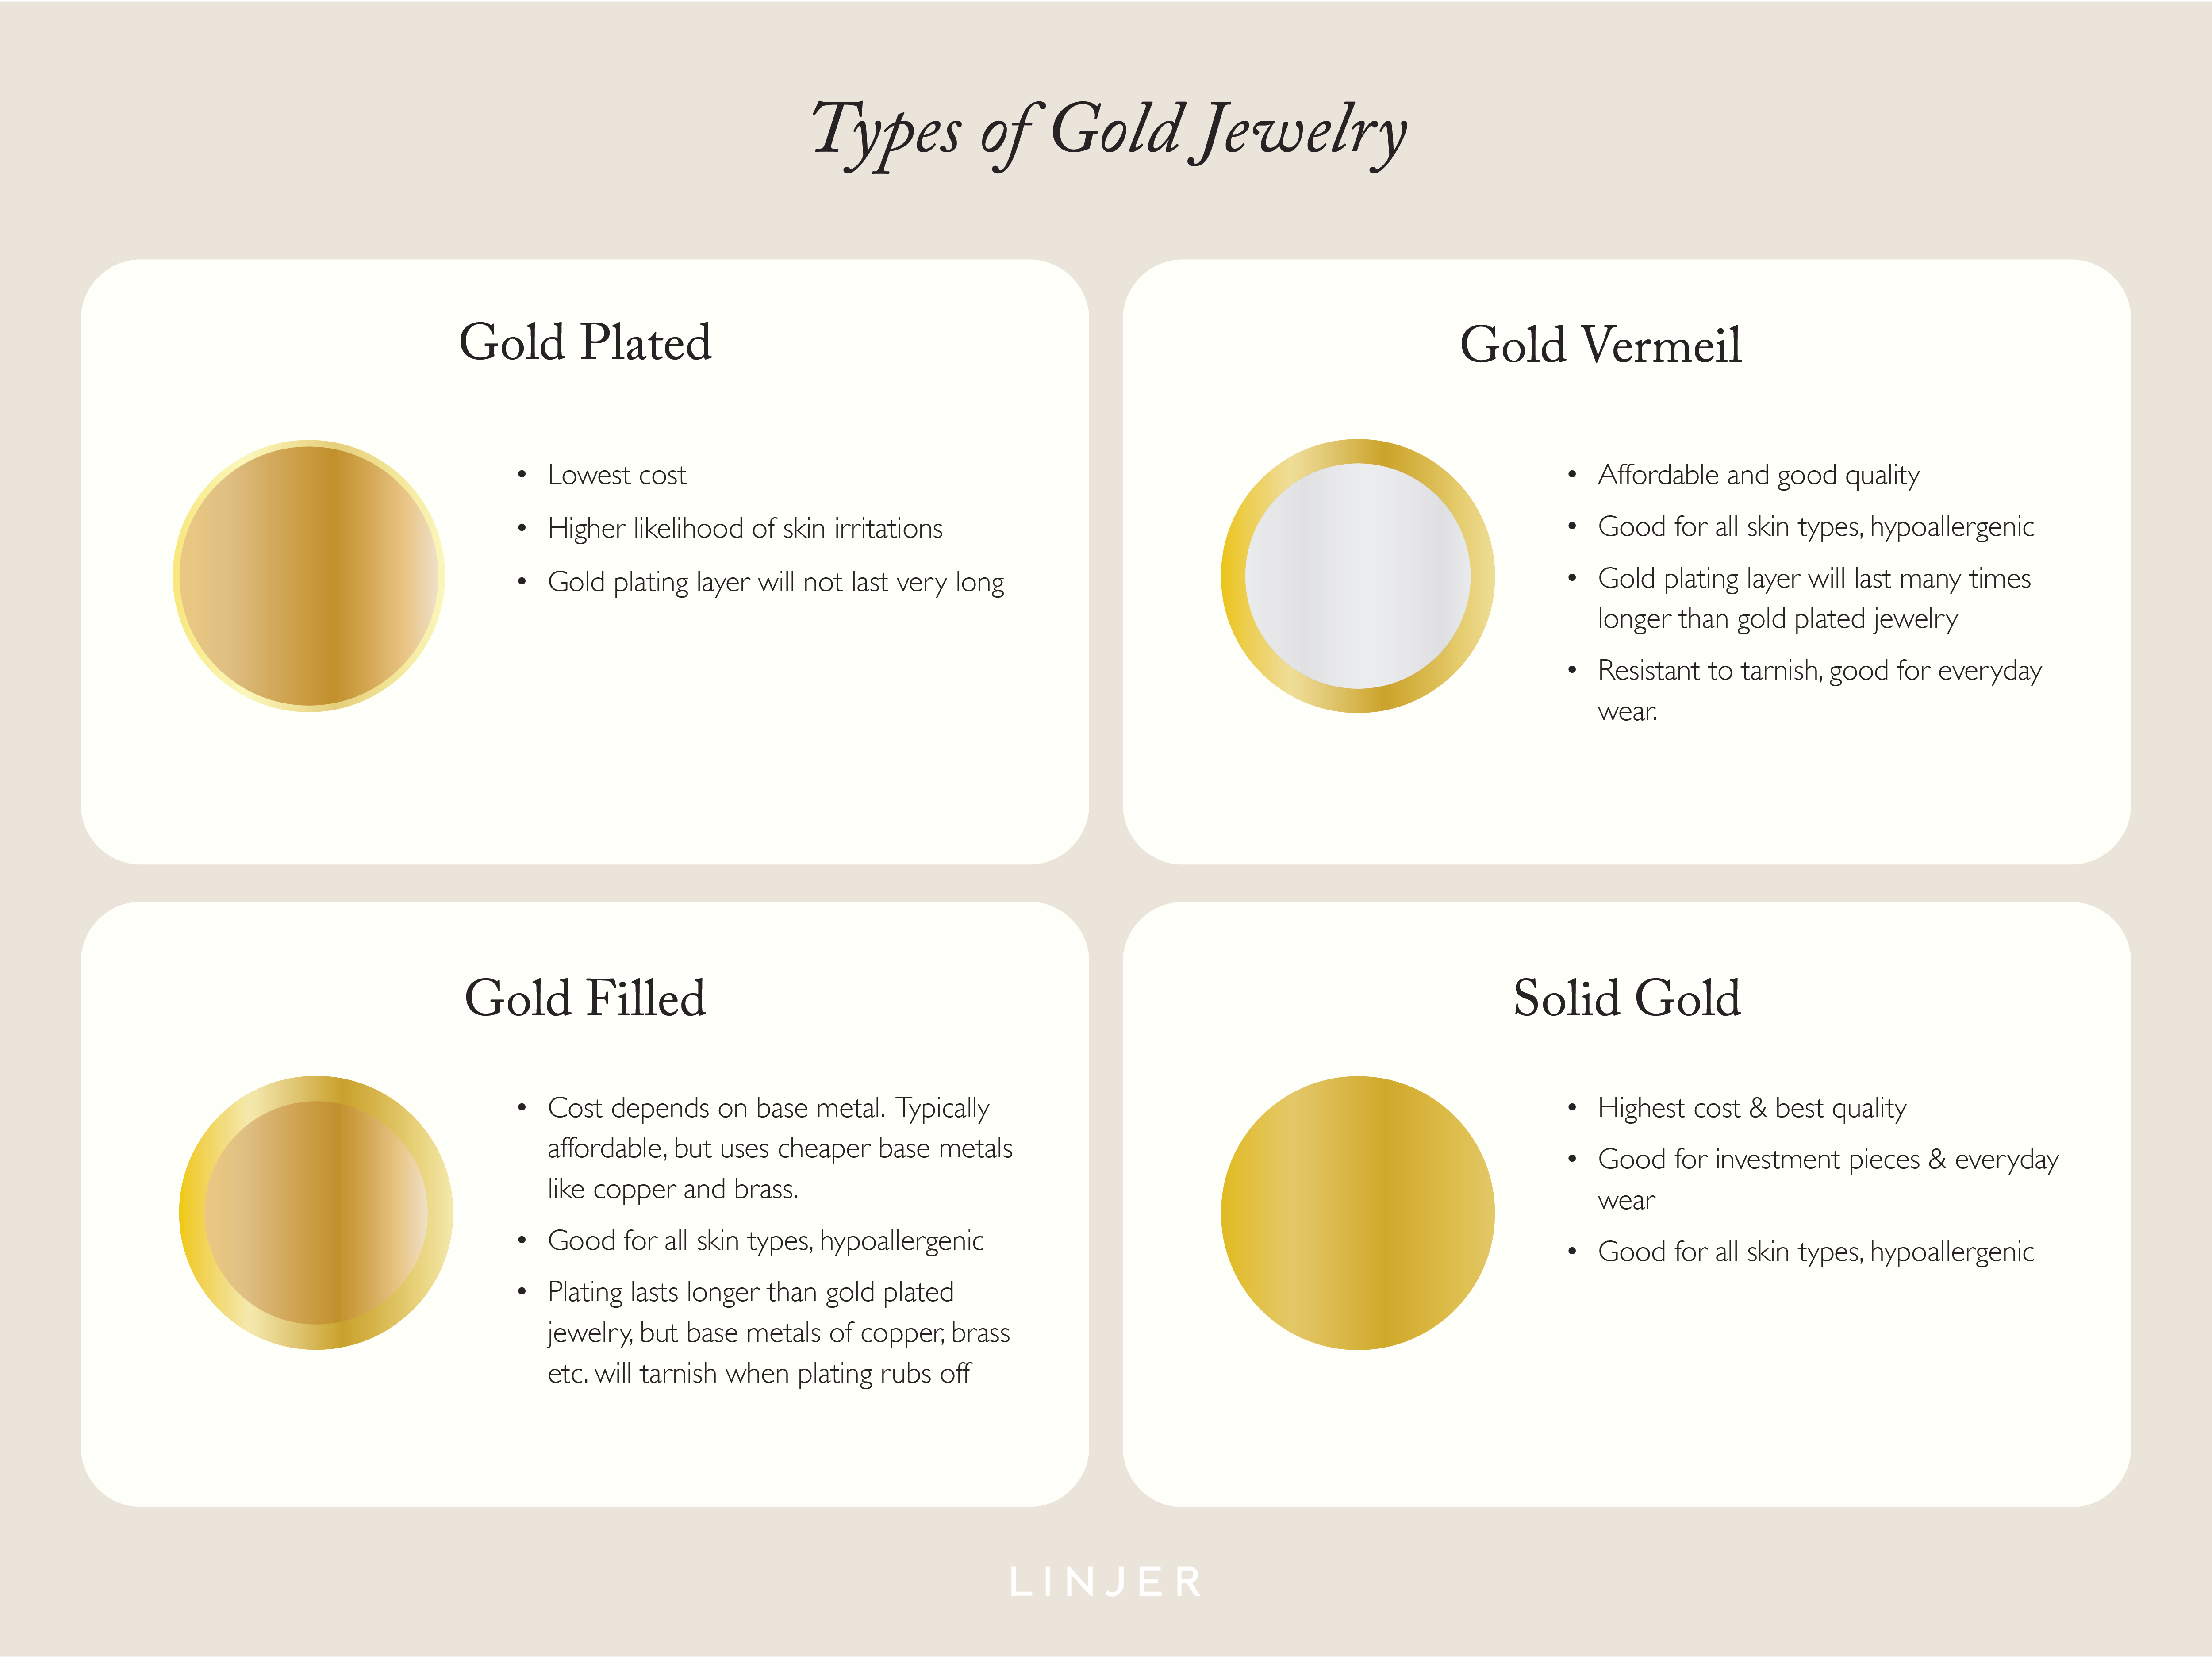 Your Complete Jewelry Source - Quality Gold